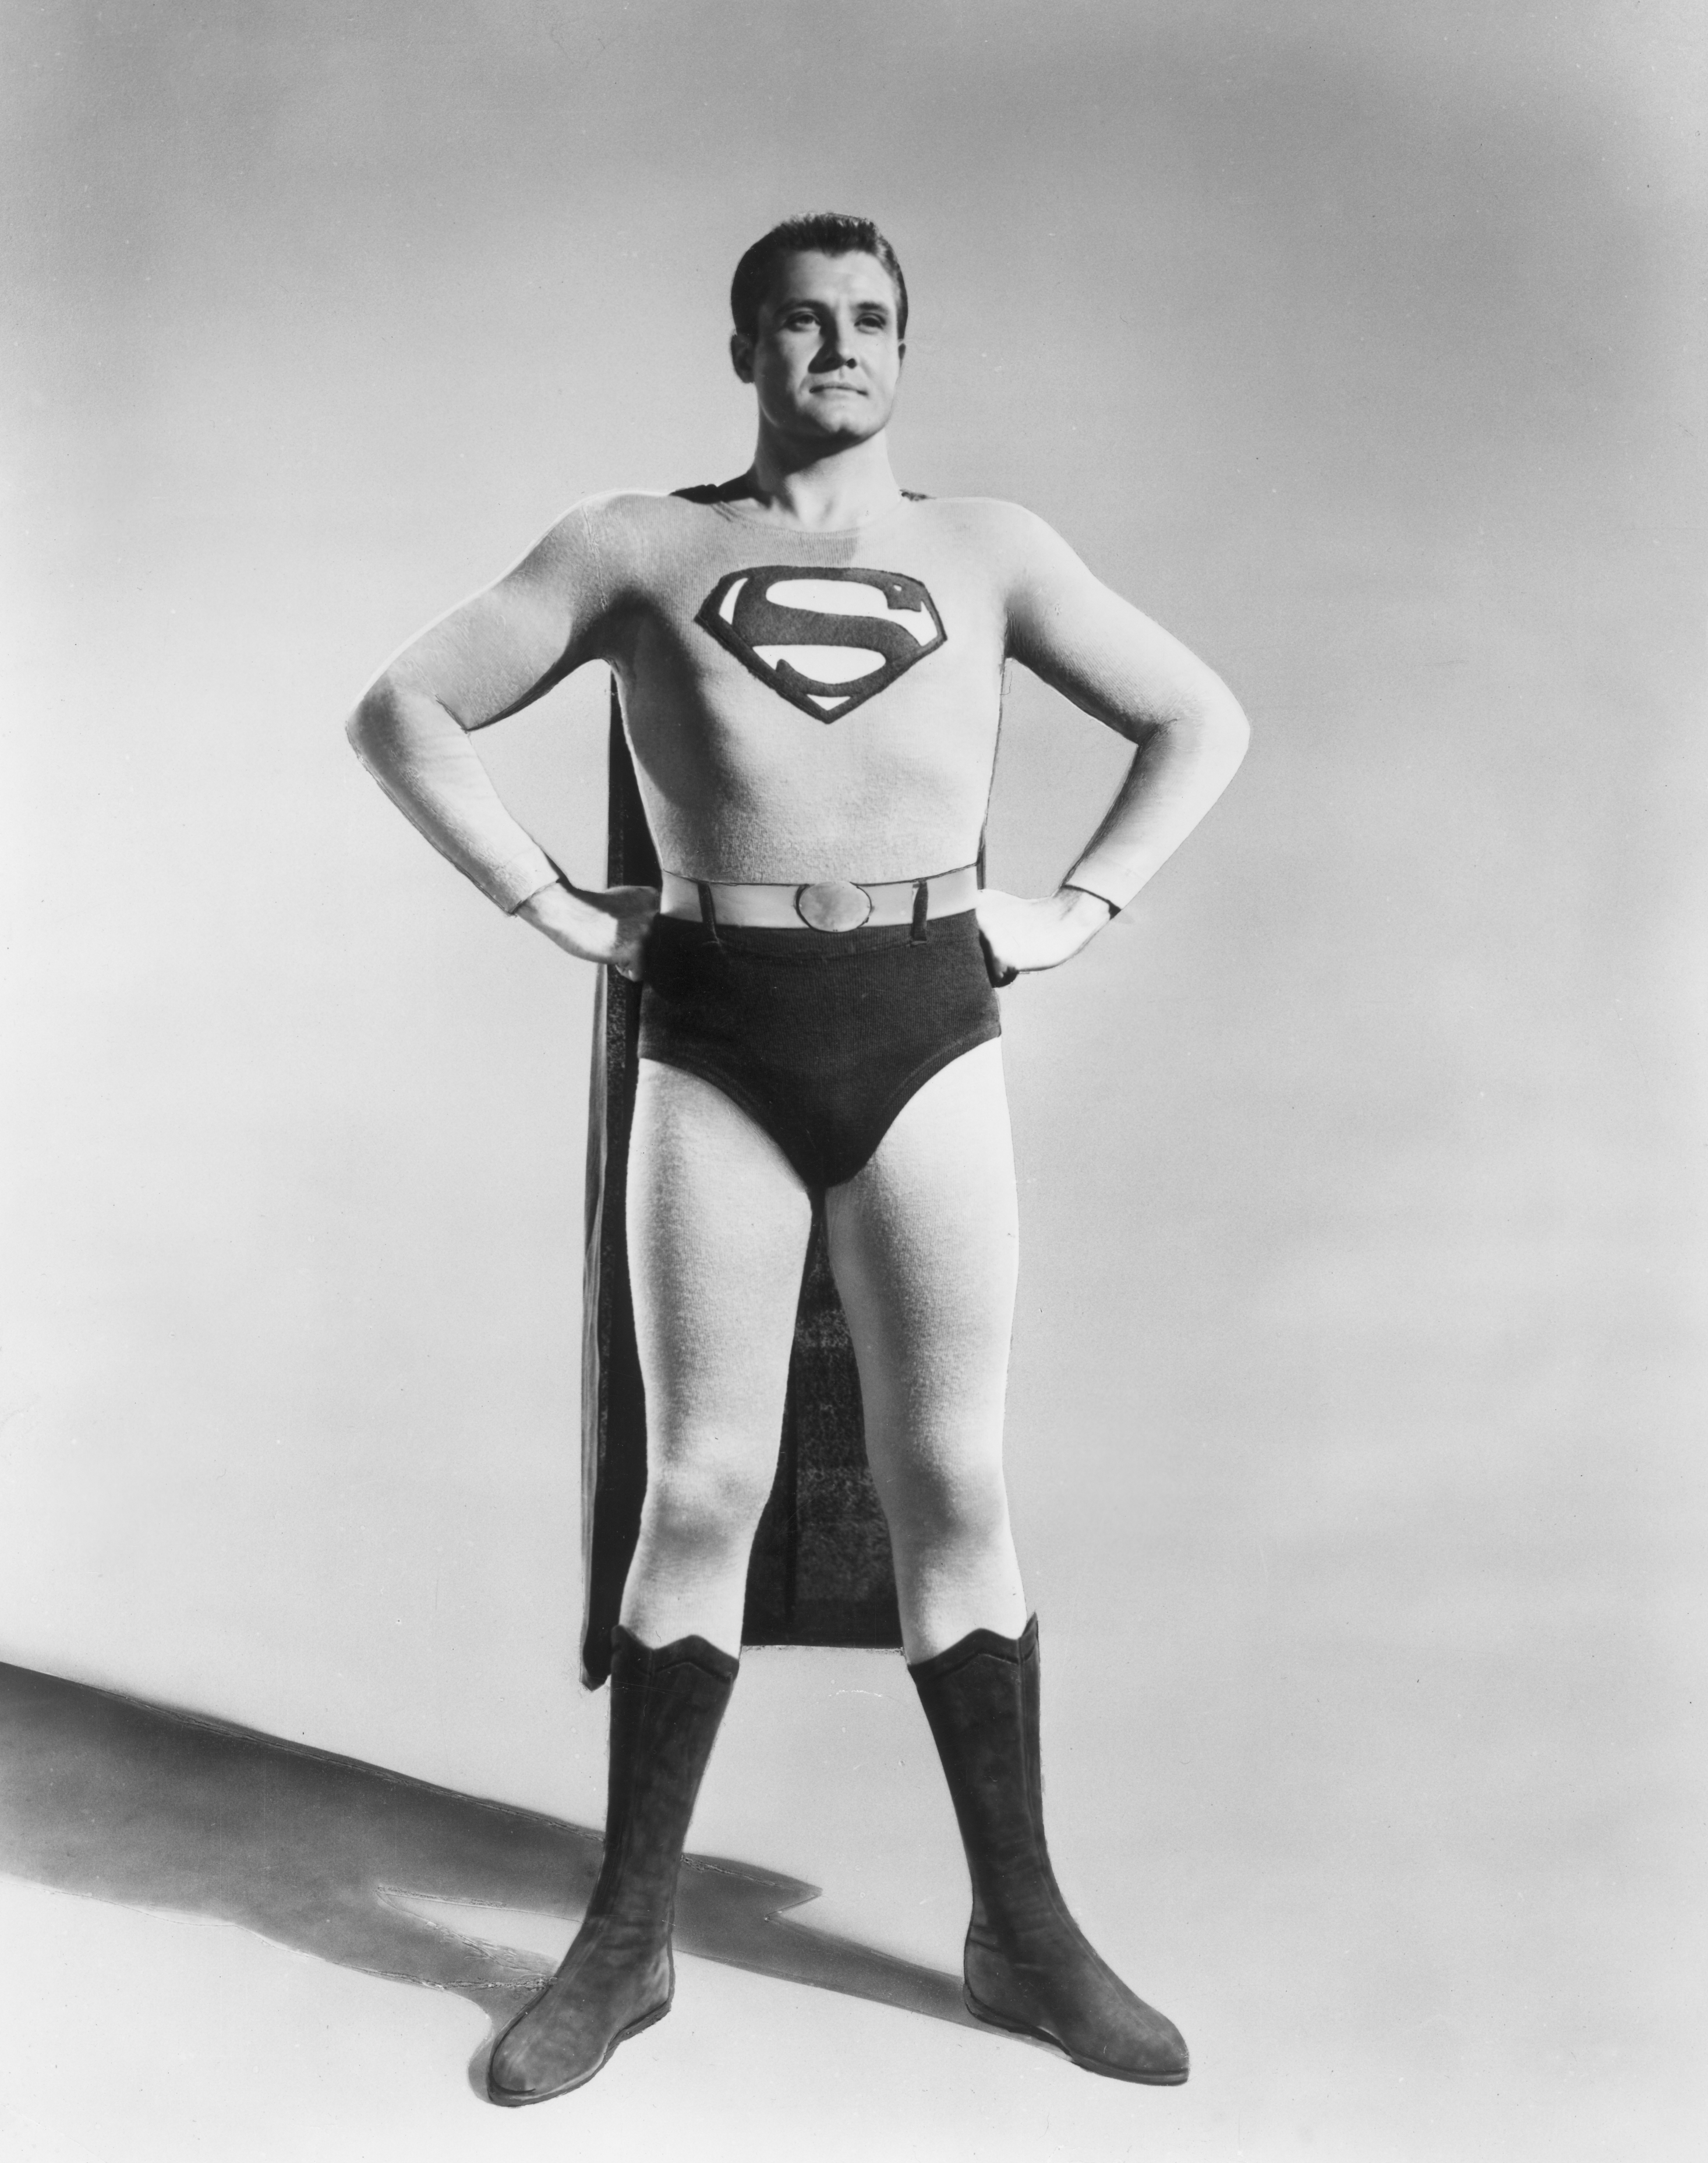 Full-length studio portrait of American actor George Reeves (1914 - 1959) in costume as the Man of Steel from the TV show 'Superman' circa 1955. | Source: Getty Images